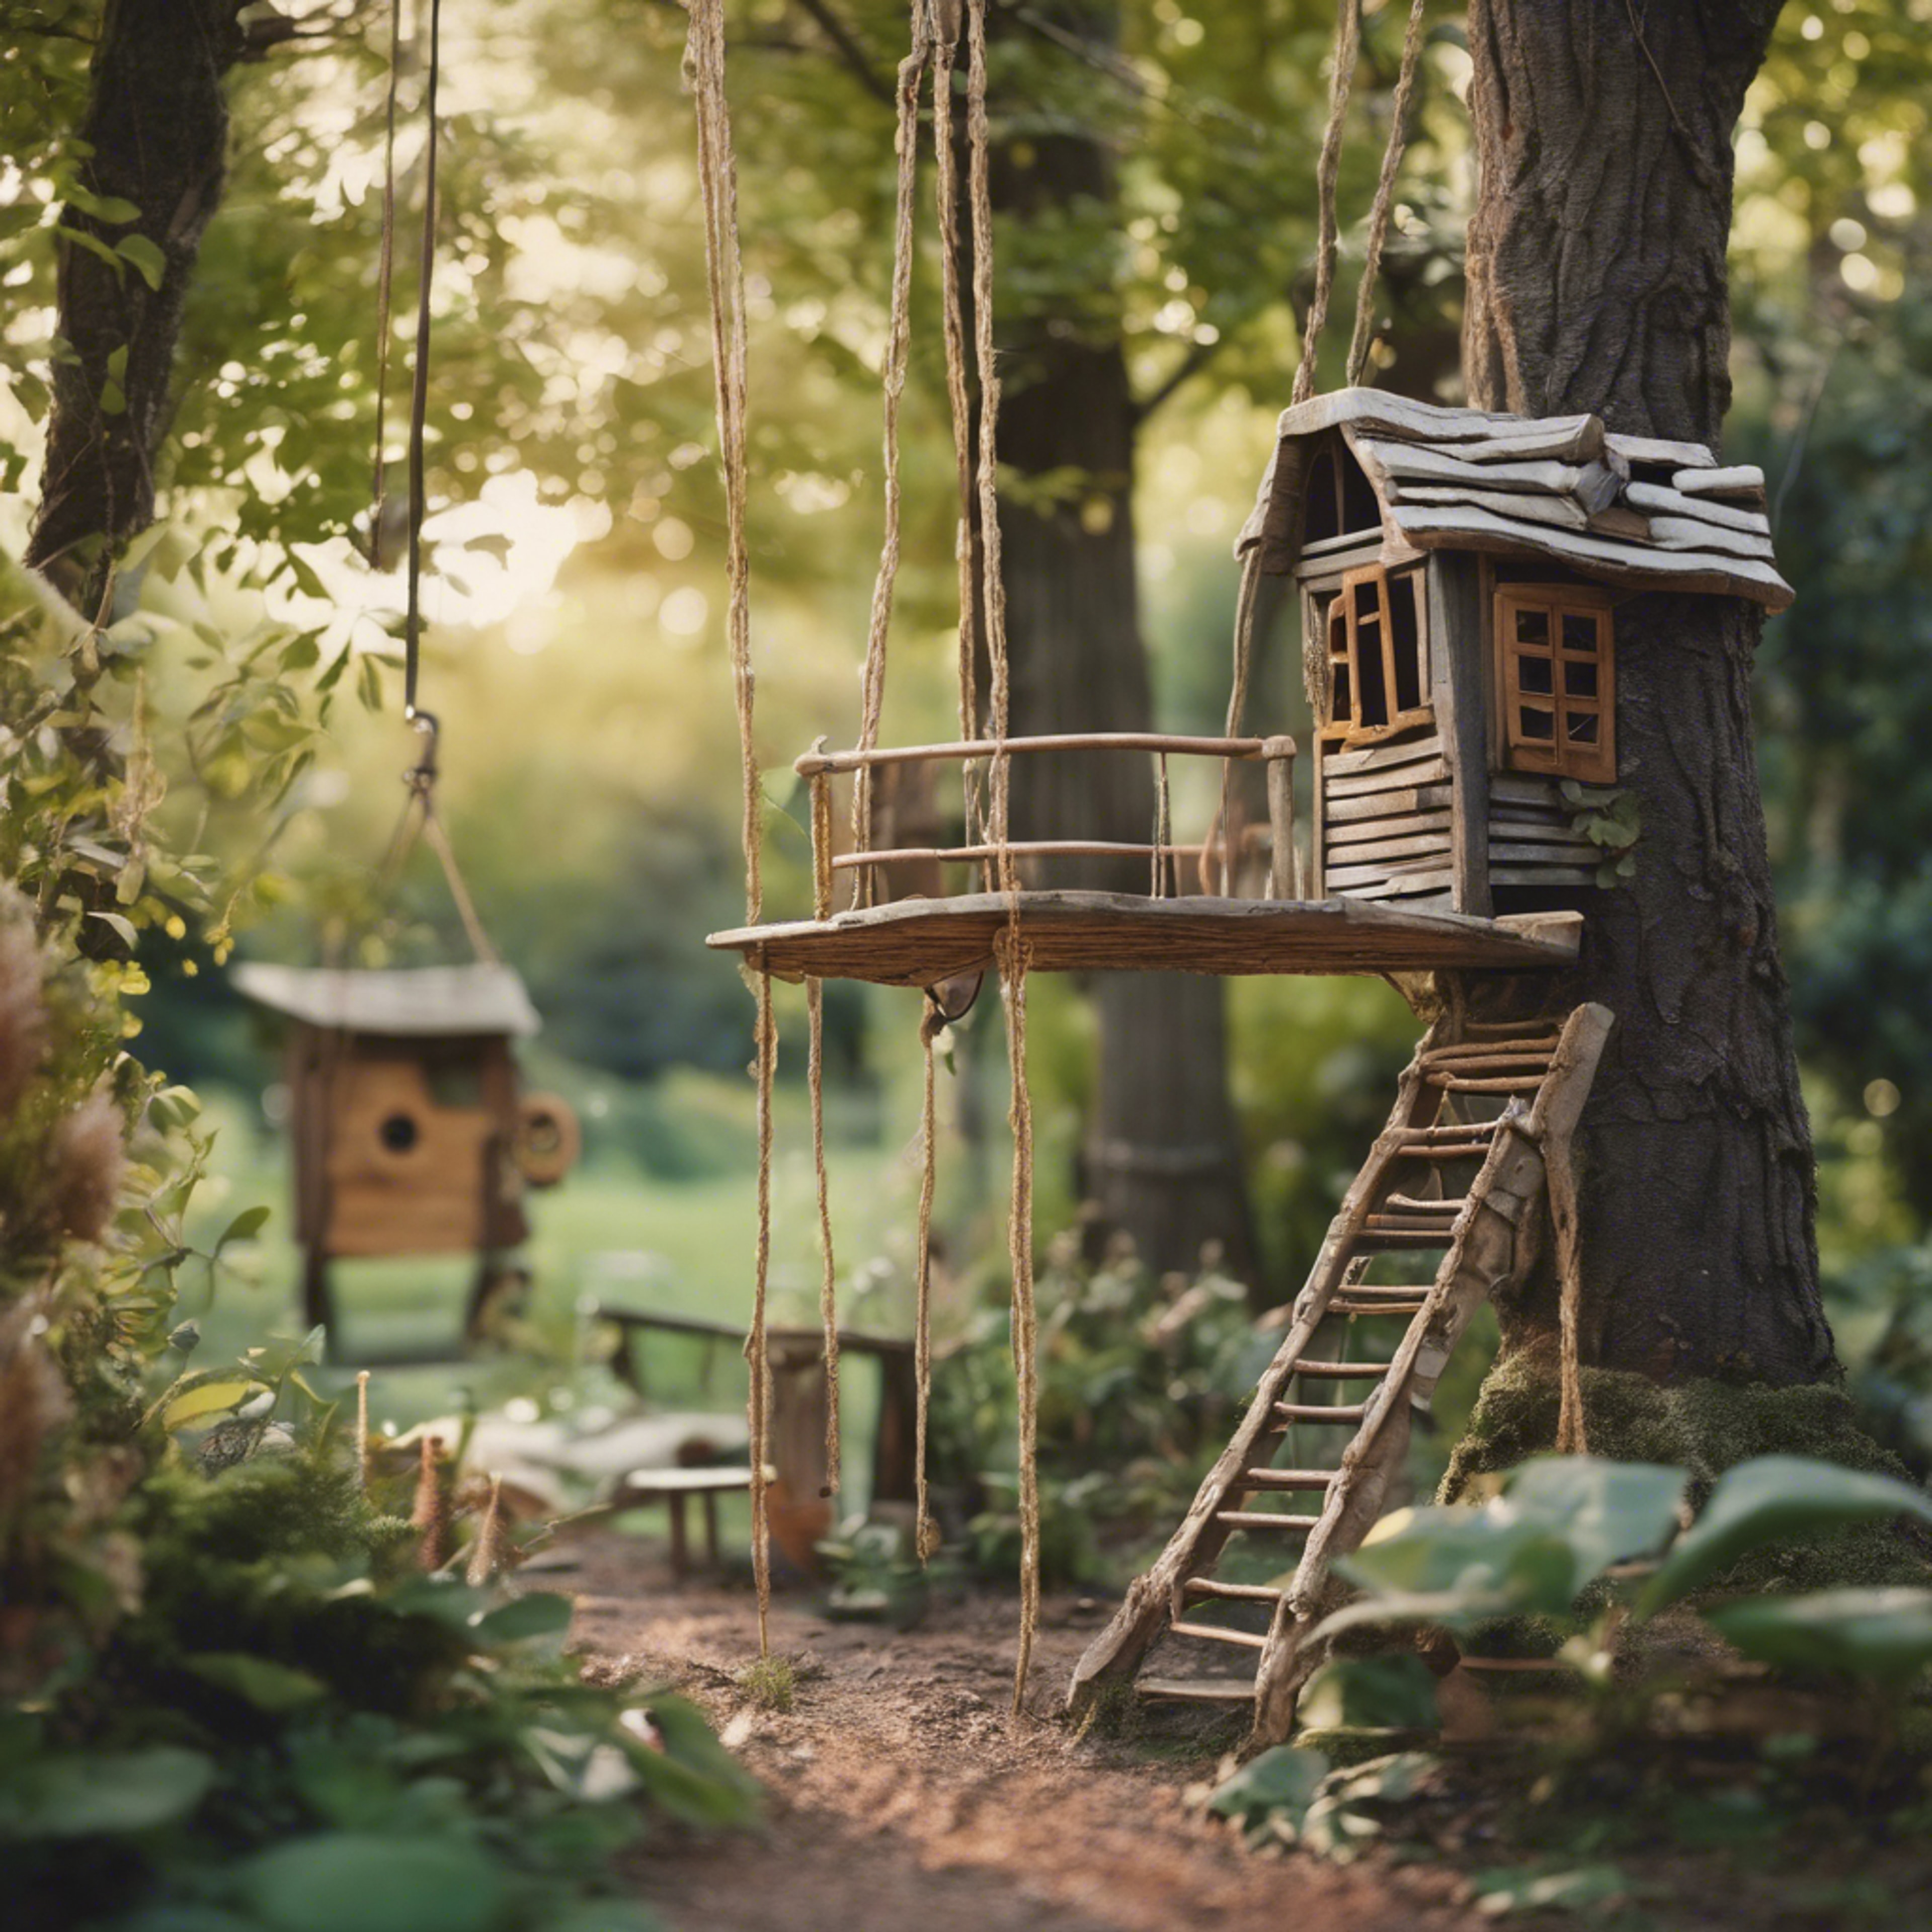 A nostalgic children’s garden filled with hidden treasures, tire swings, and treehouses built amidst towering trees. Behang[4077f42451f34ca69b37]